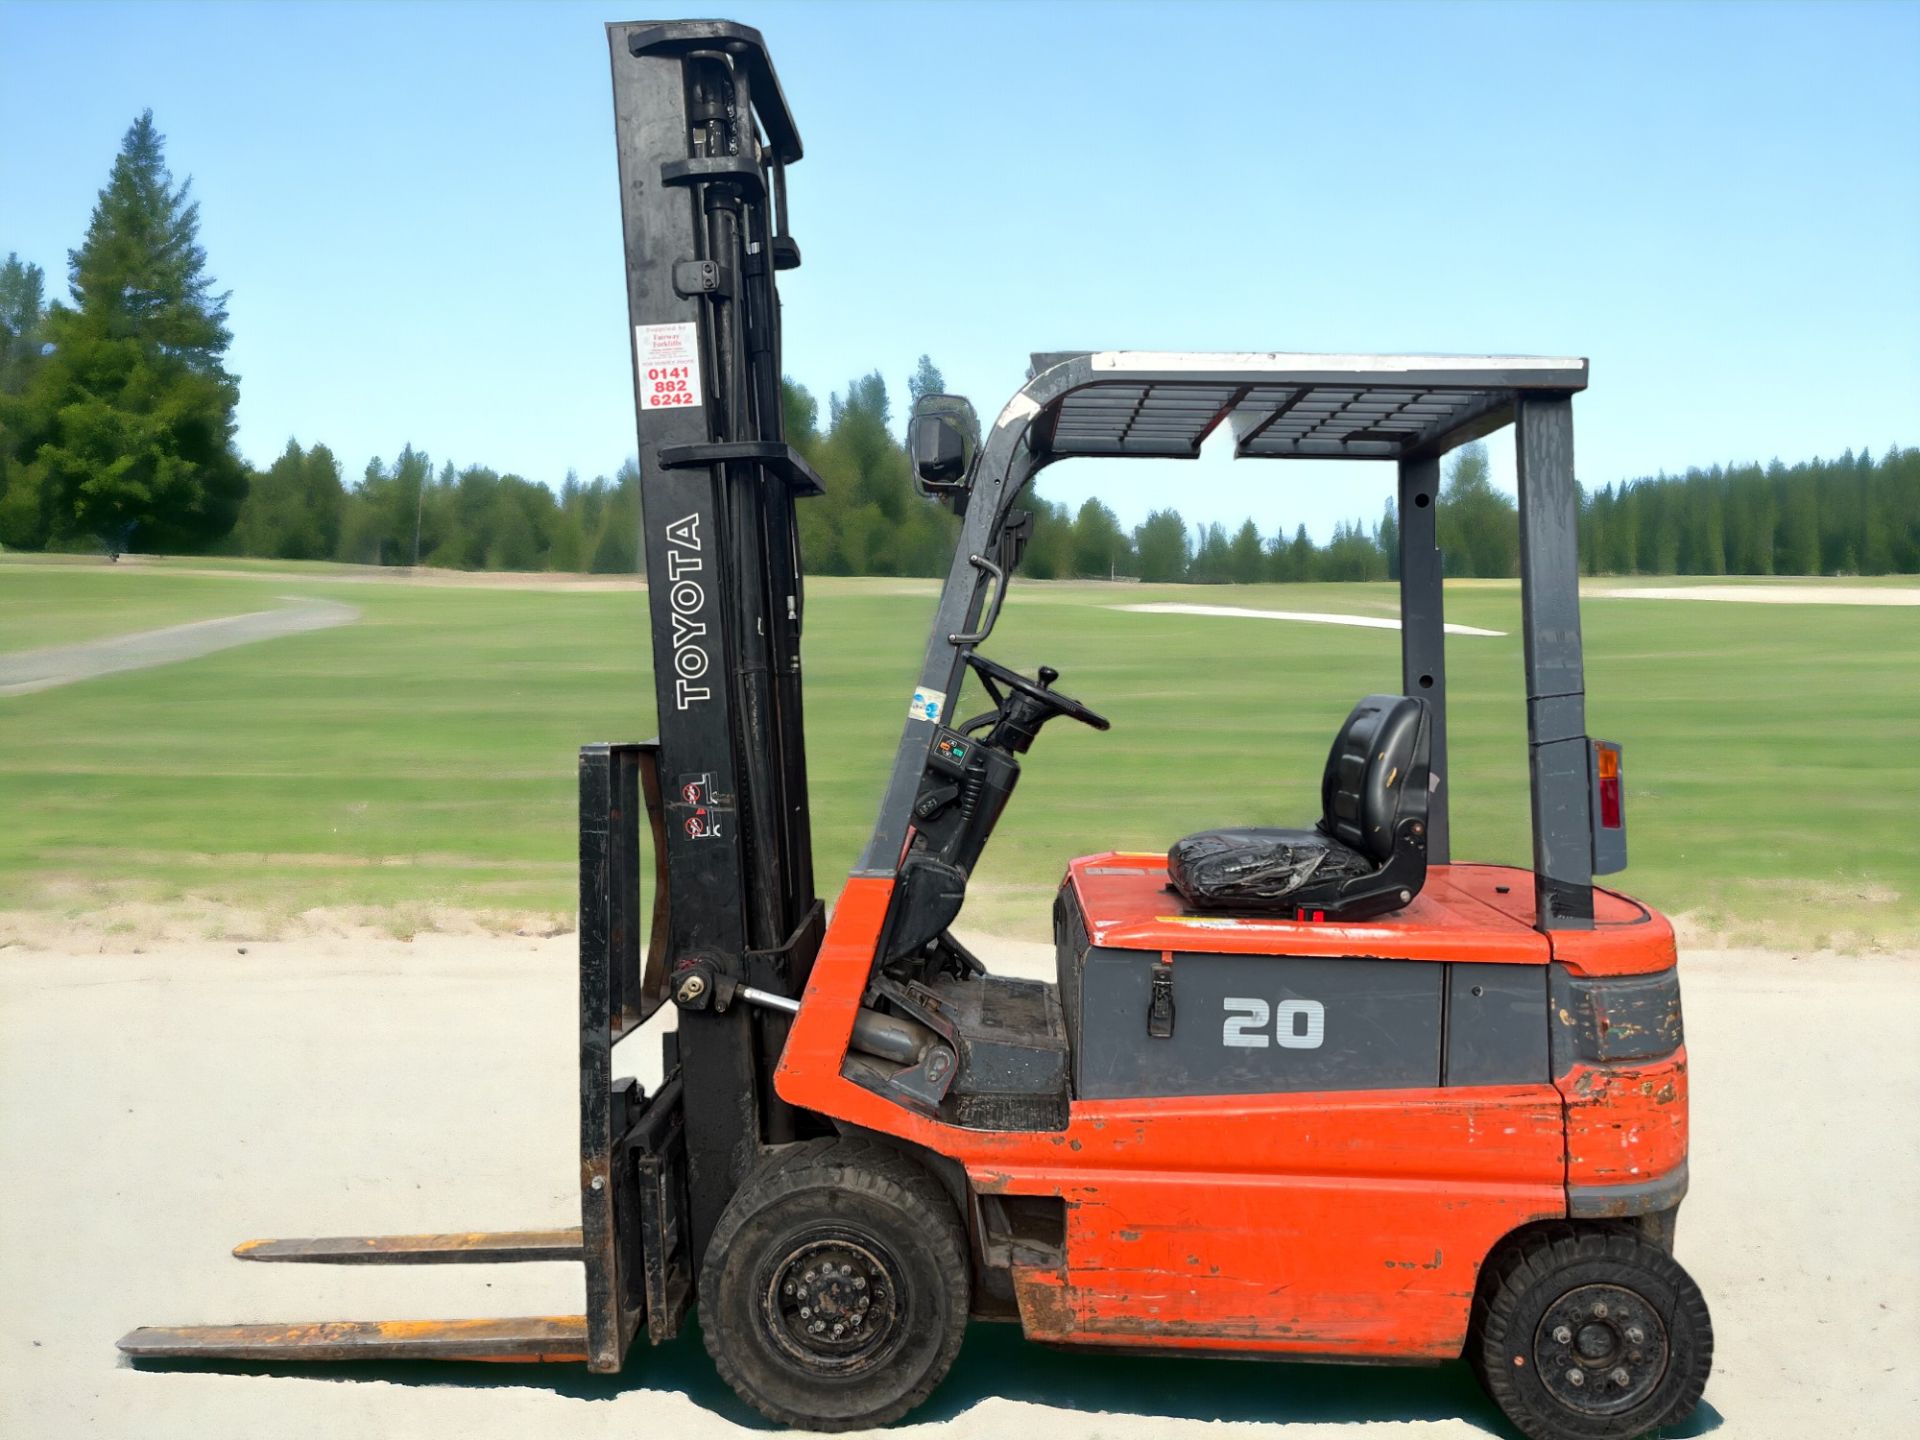 TOYOTA ELECTRIC 4-WHEEL FORKLIFT - FBM20 (2000) **(INCLUDES CHARGER)**